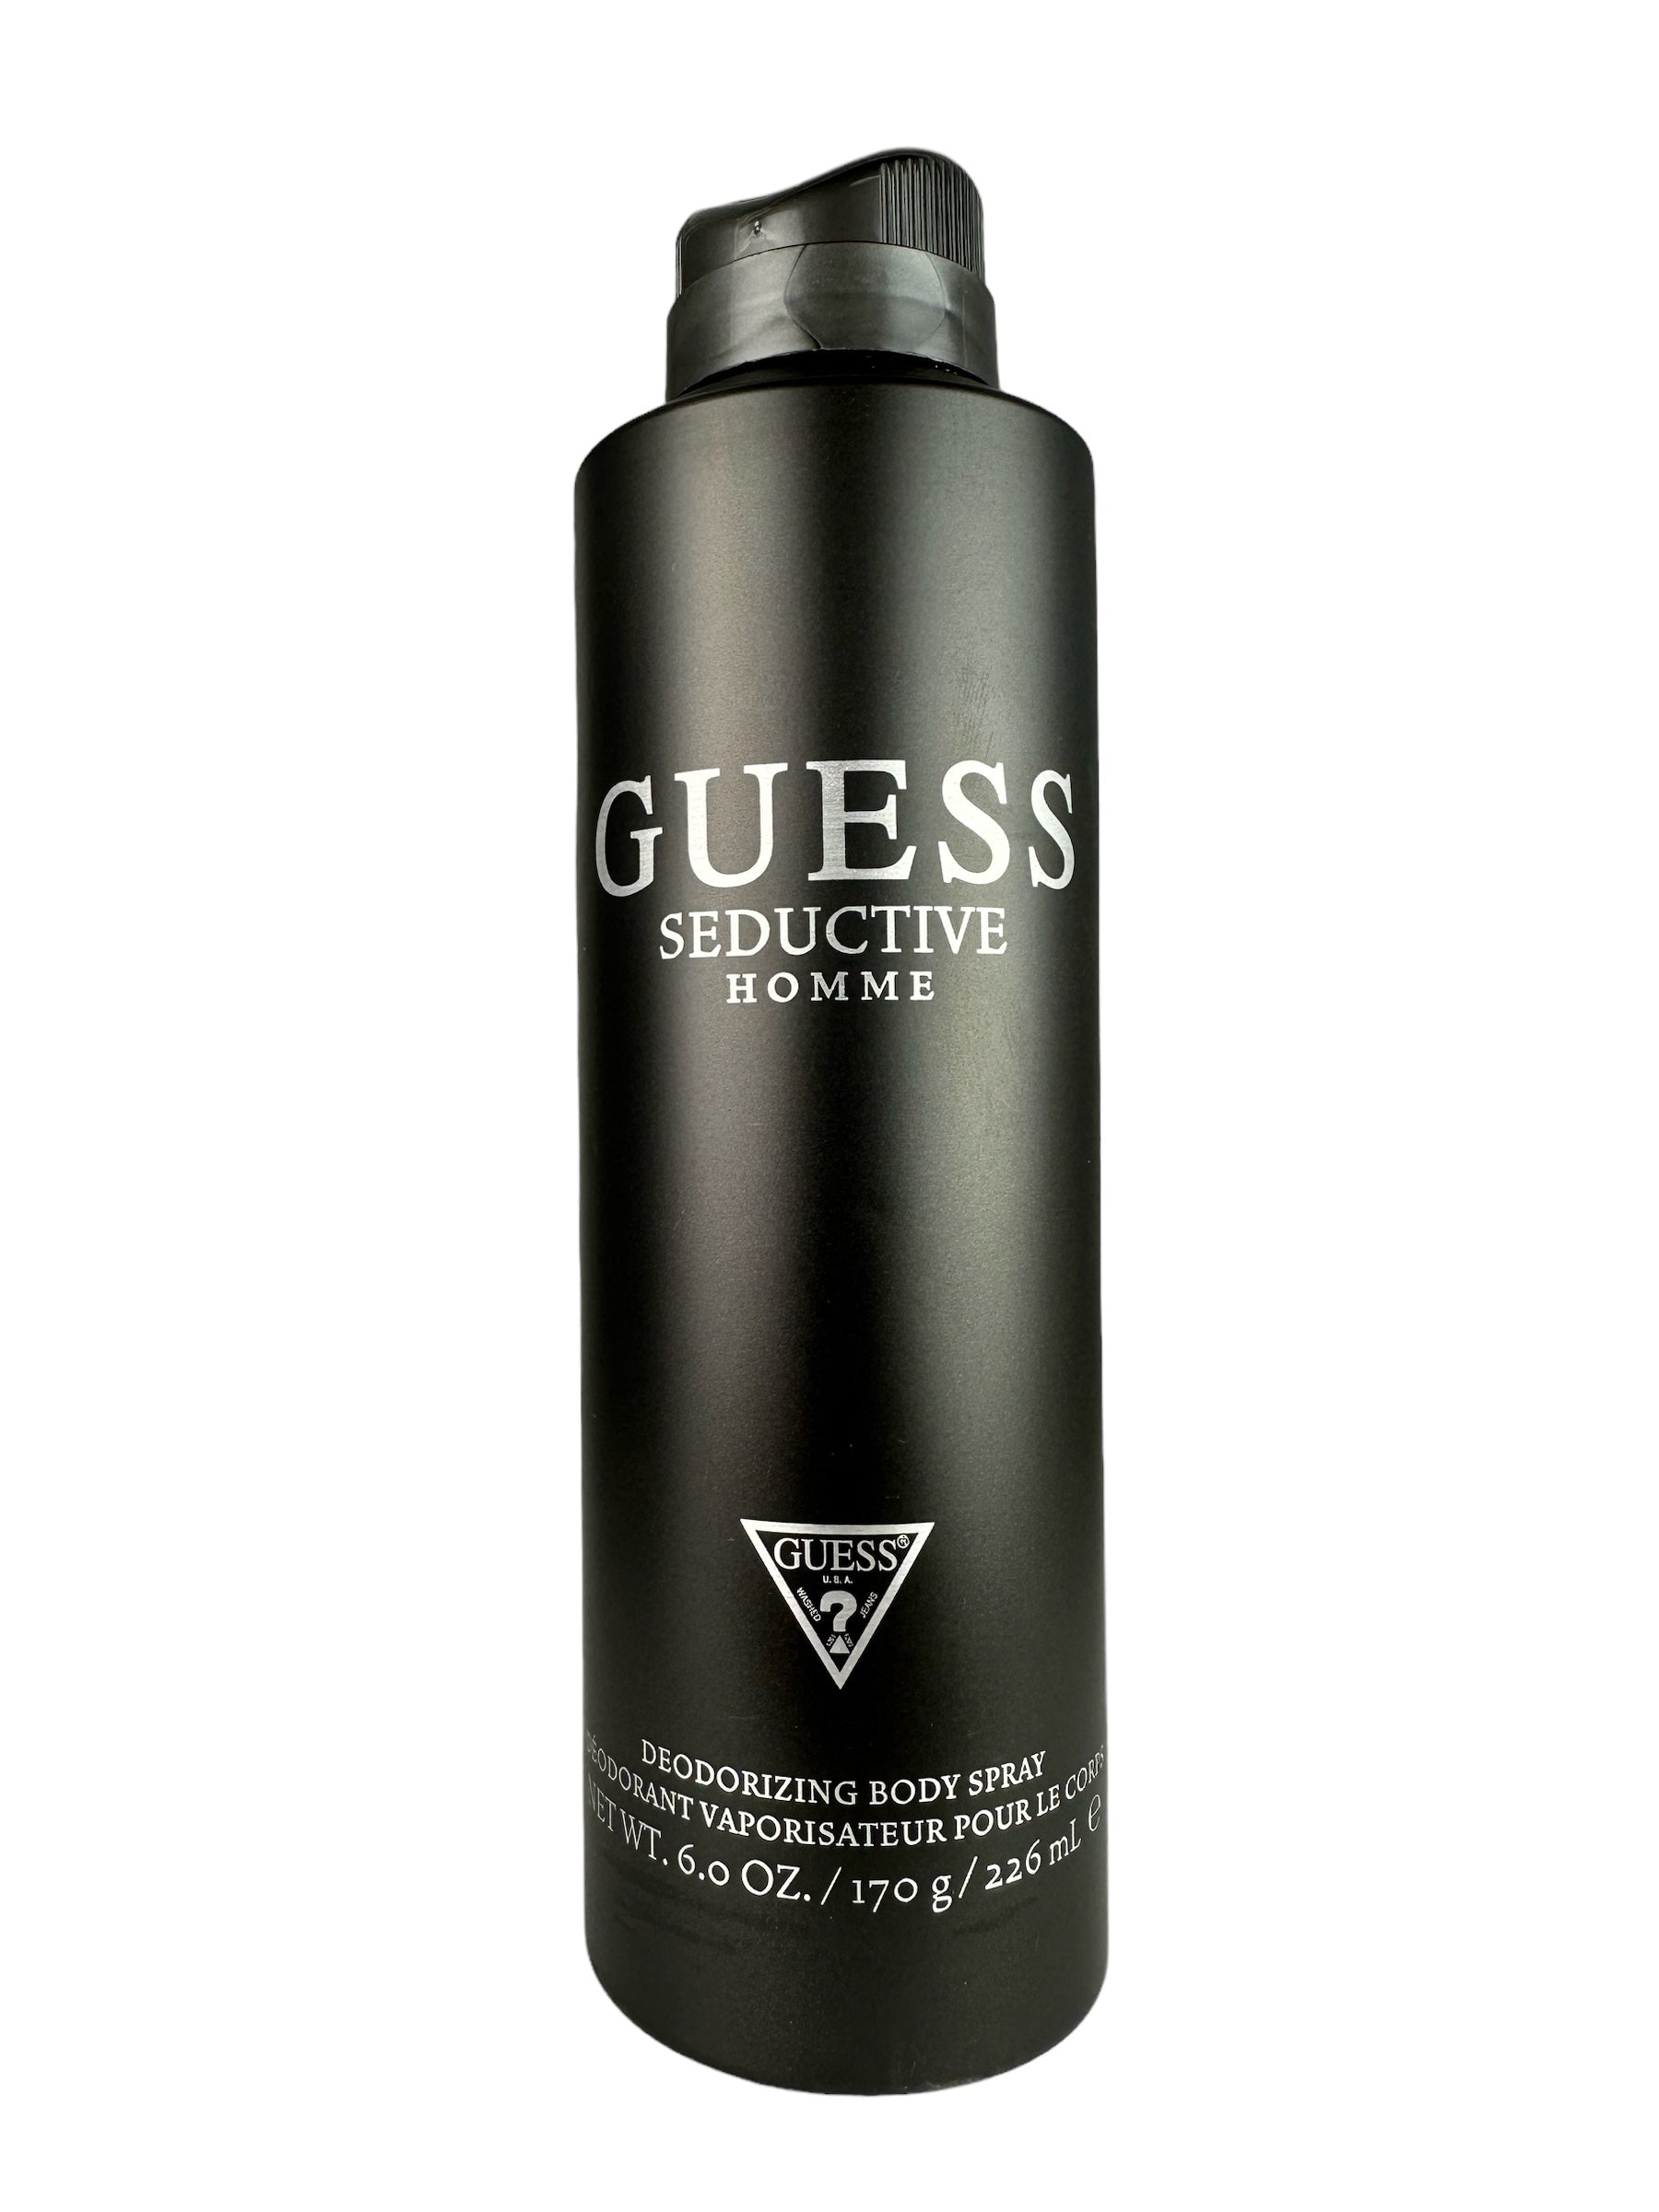 Guess Seductive Homme Body Spray for Men